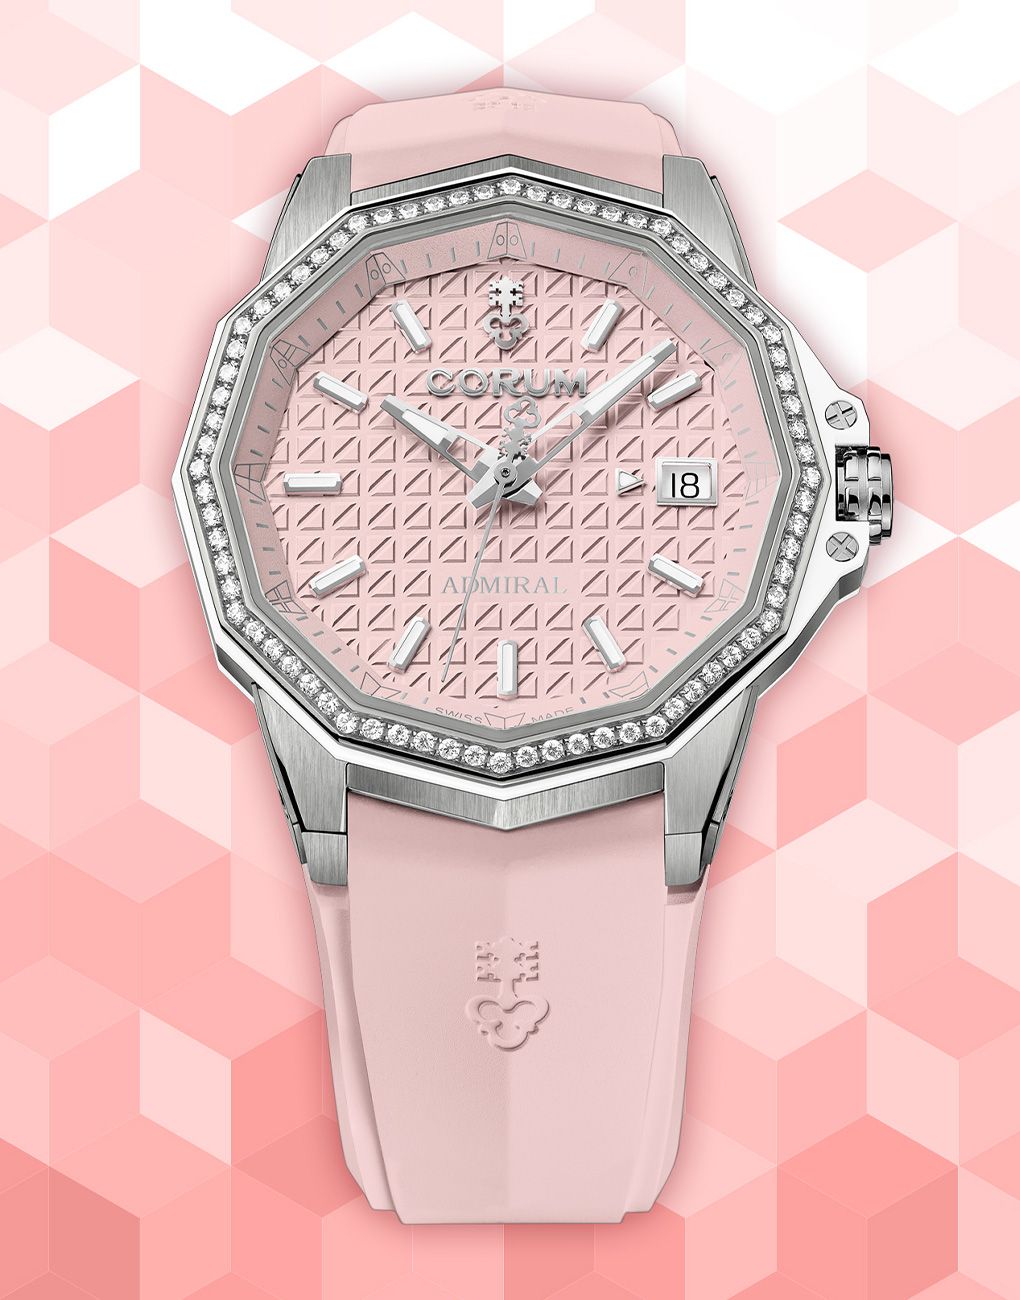 Top Watches With Pink Dials That Are Breathtakingly Beautiful